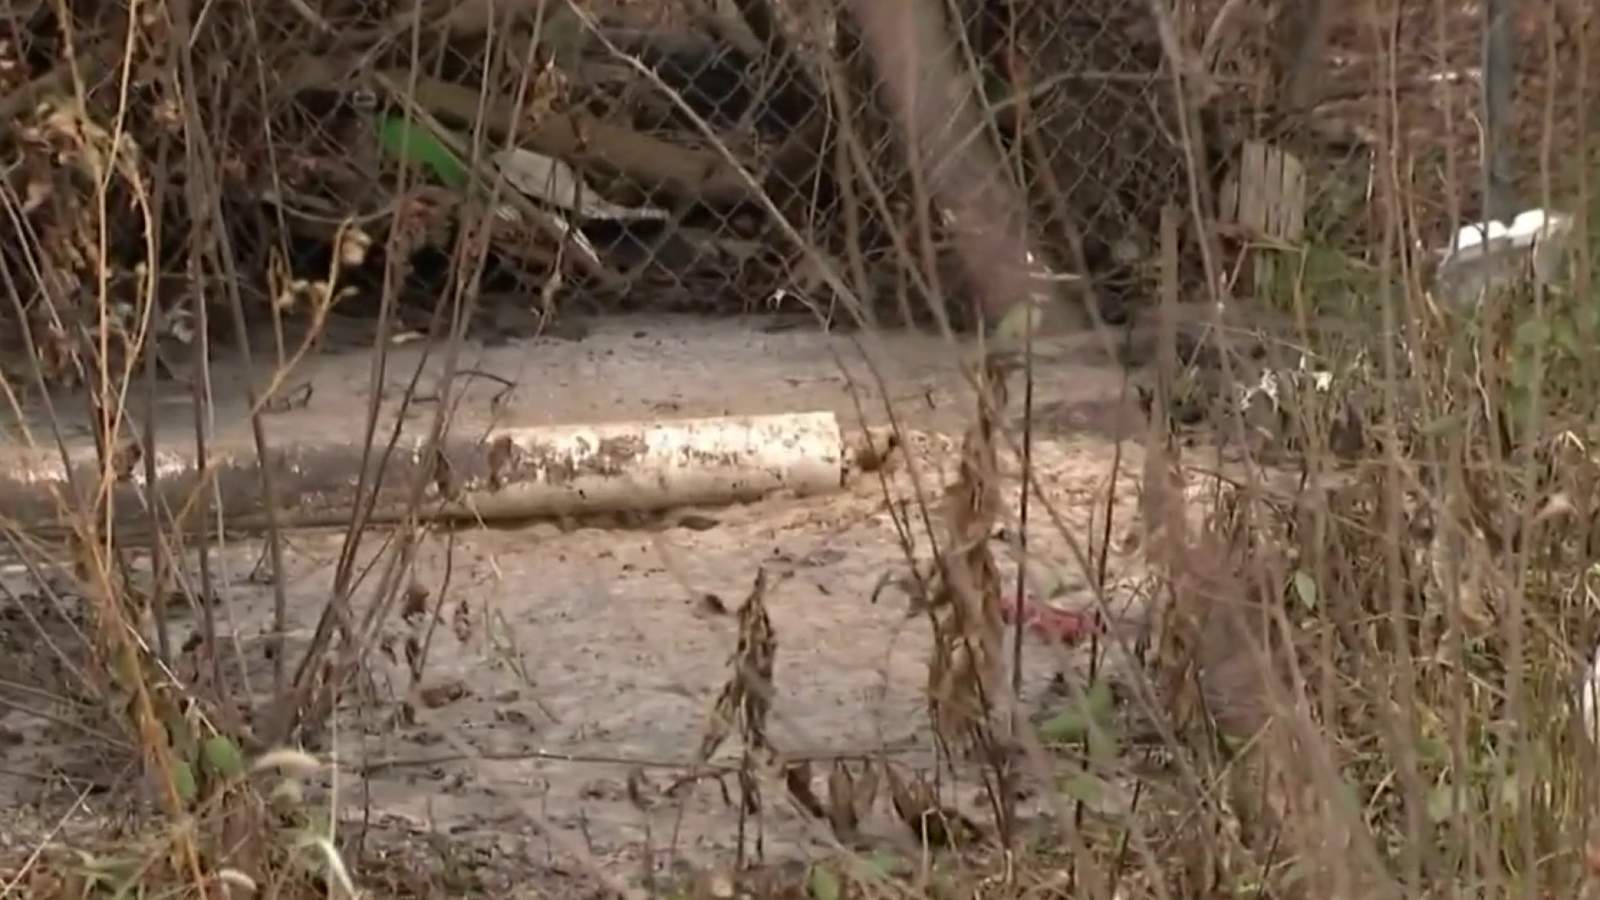 Detroit senior citizen claims neighbor is dumping raw sewage in backyard of home